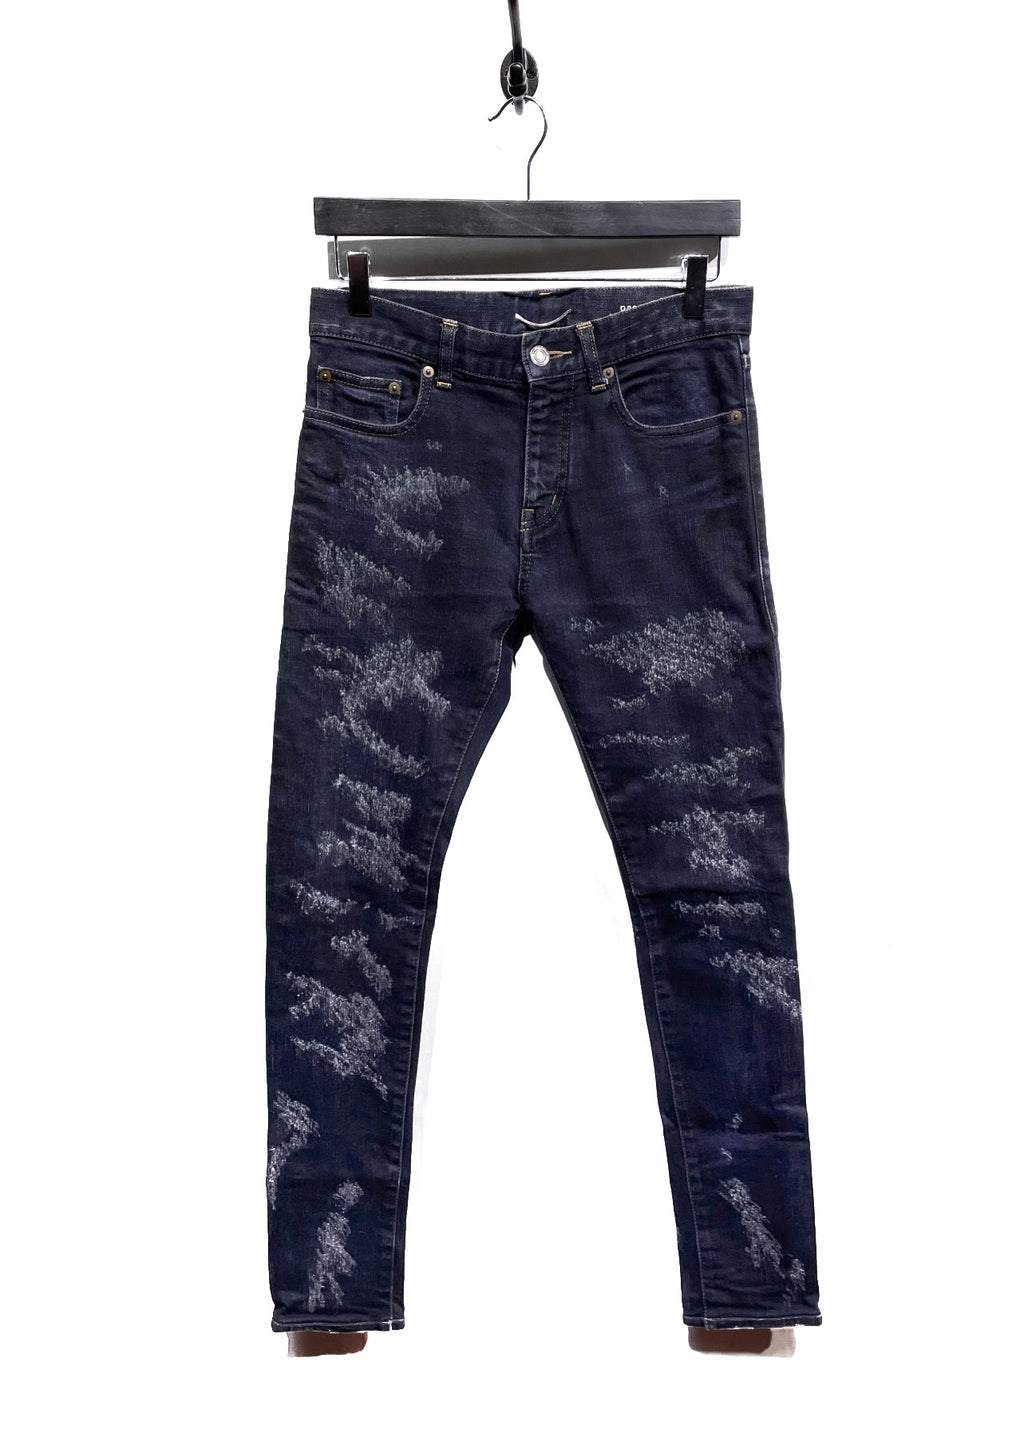 Saint Laurent FW13 D02 Washed Blue Waxed Destroyed Skinny Jeans